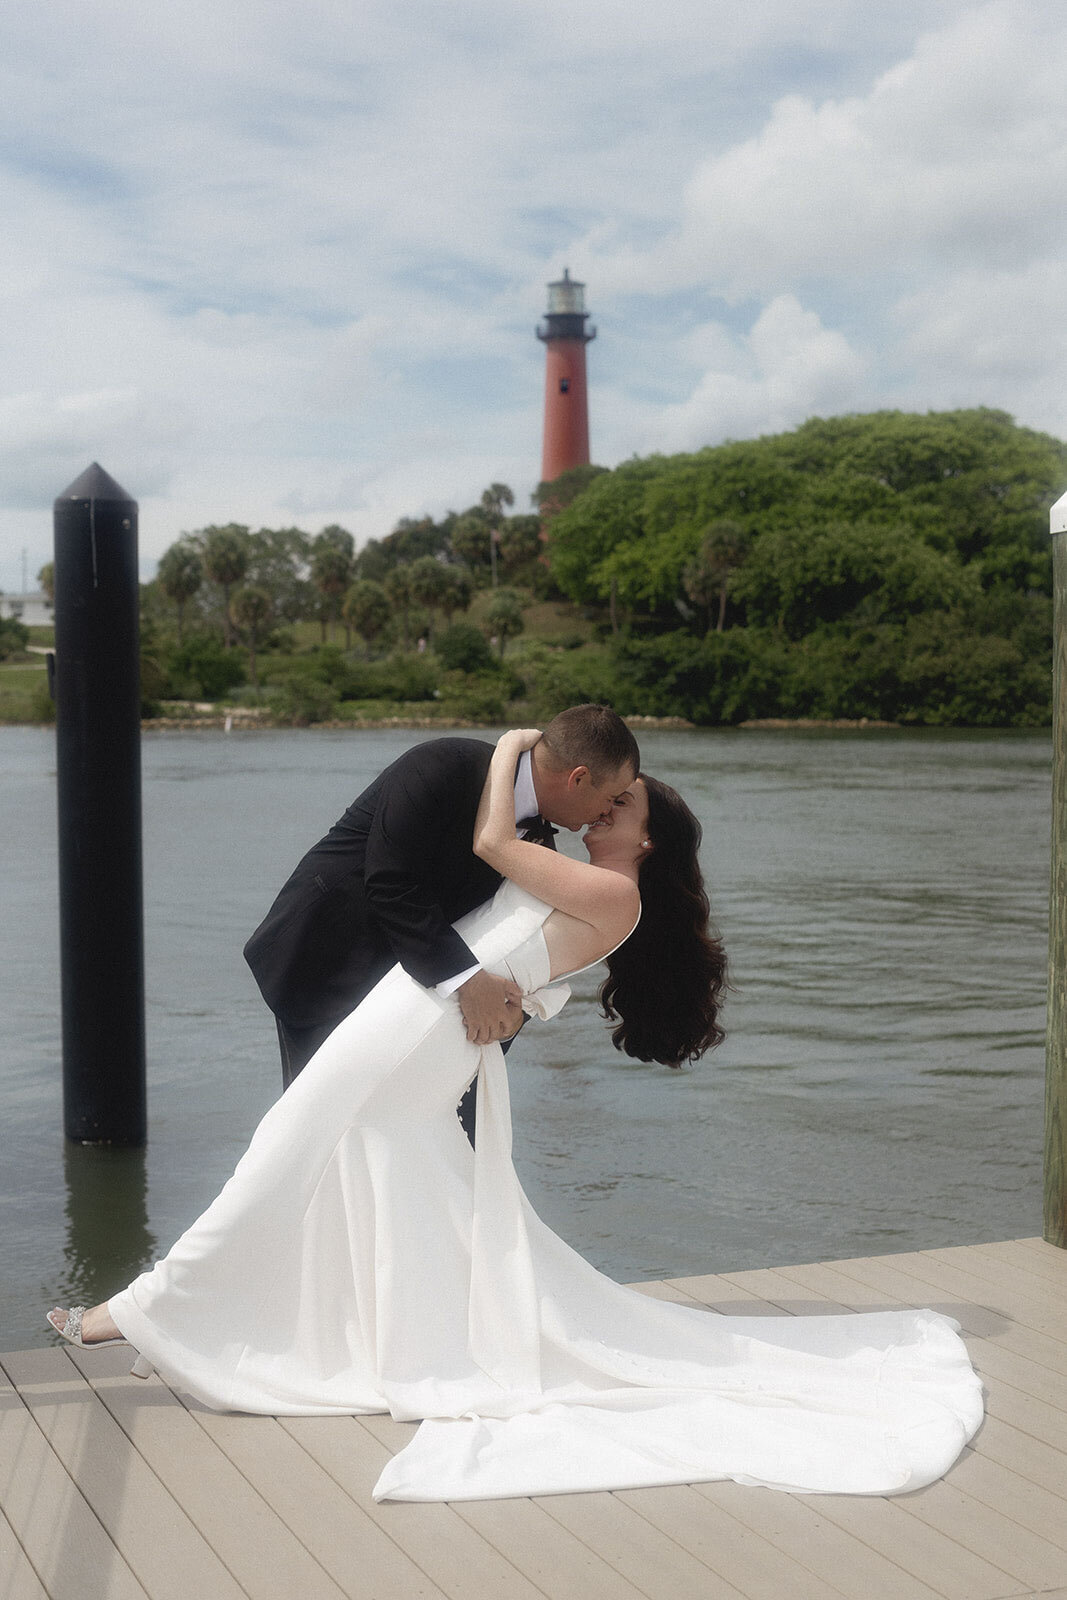 Bridge and groom kissing at an outdoor wedding ceremony with lighthouse in the background